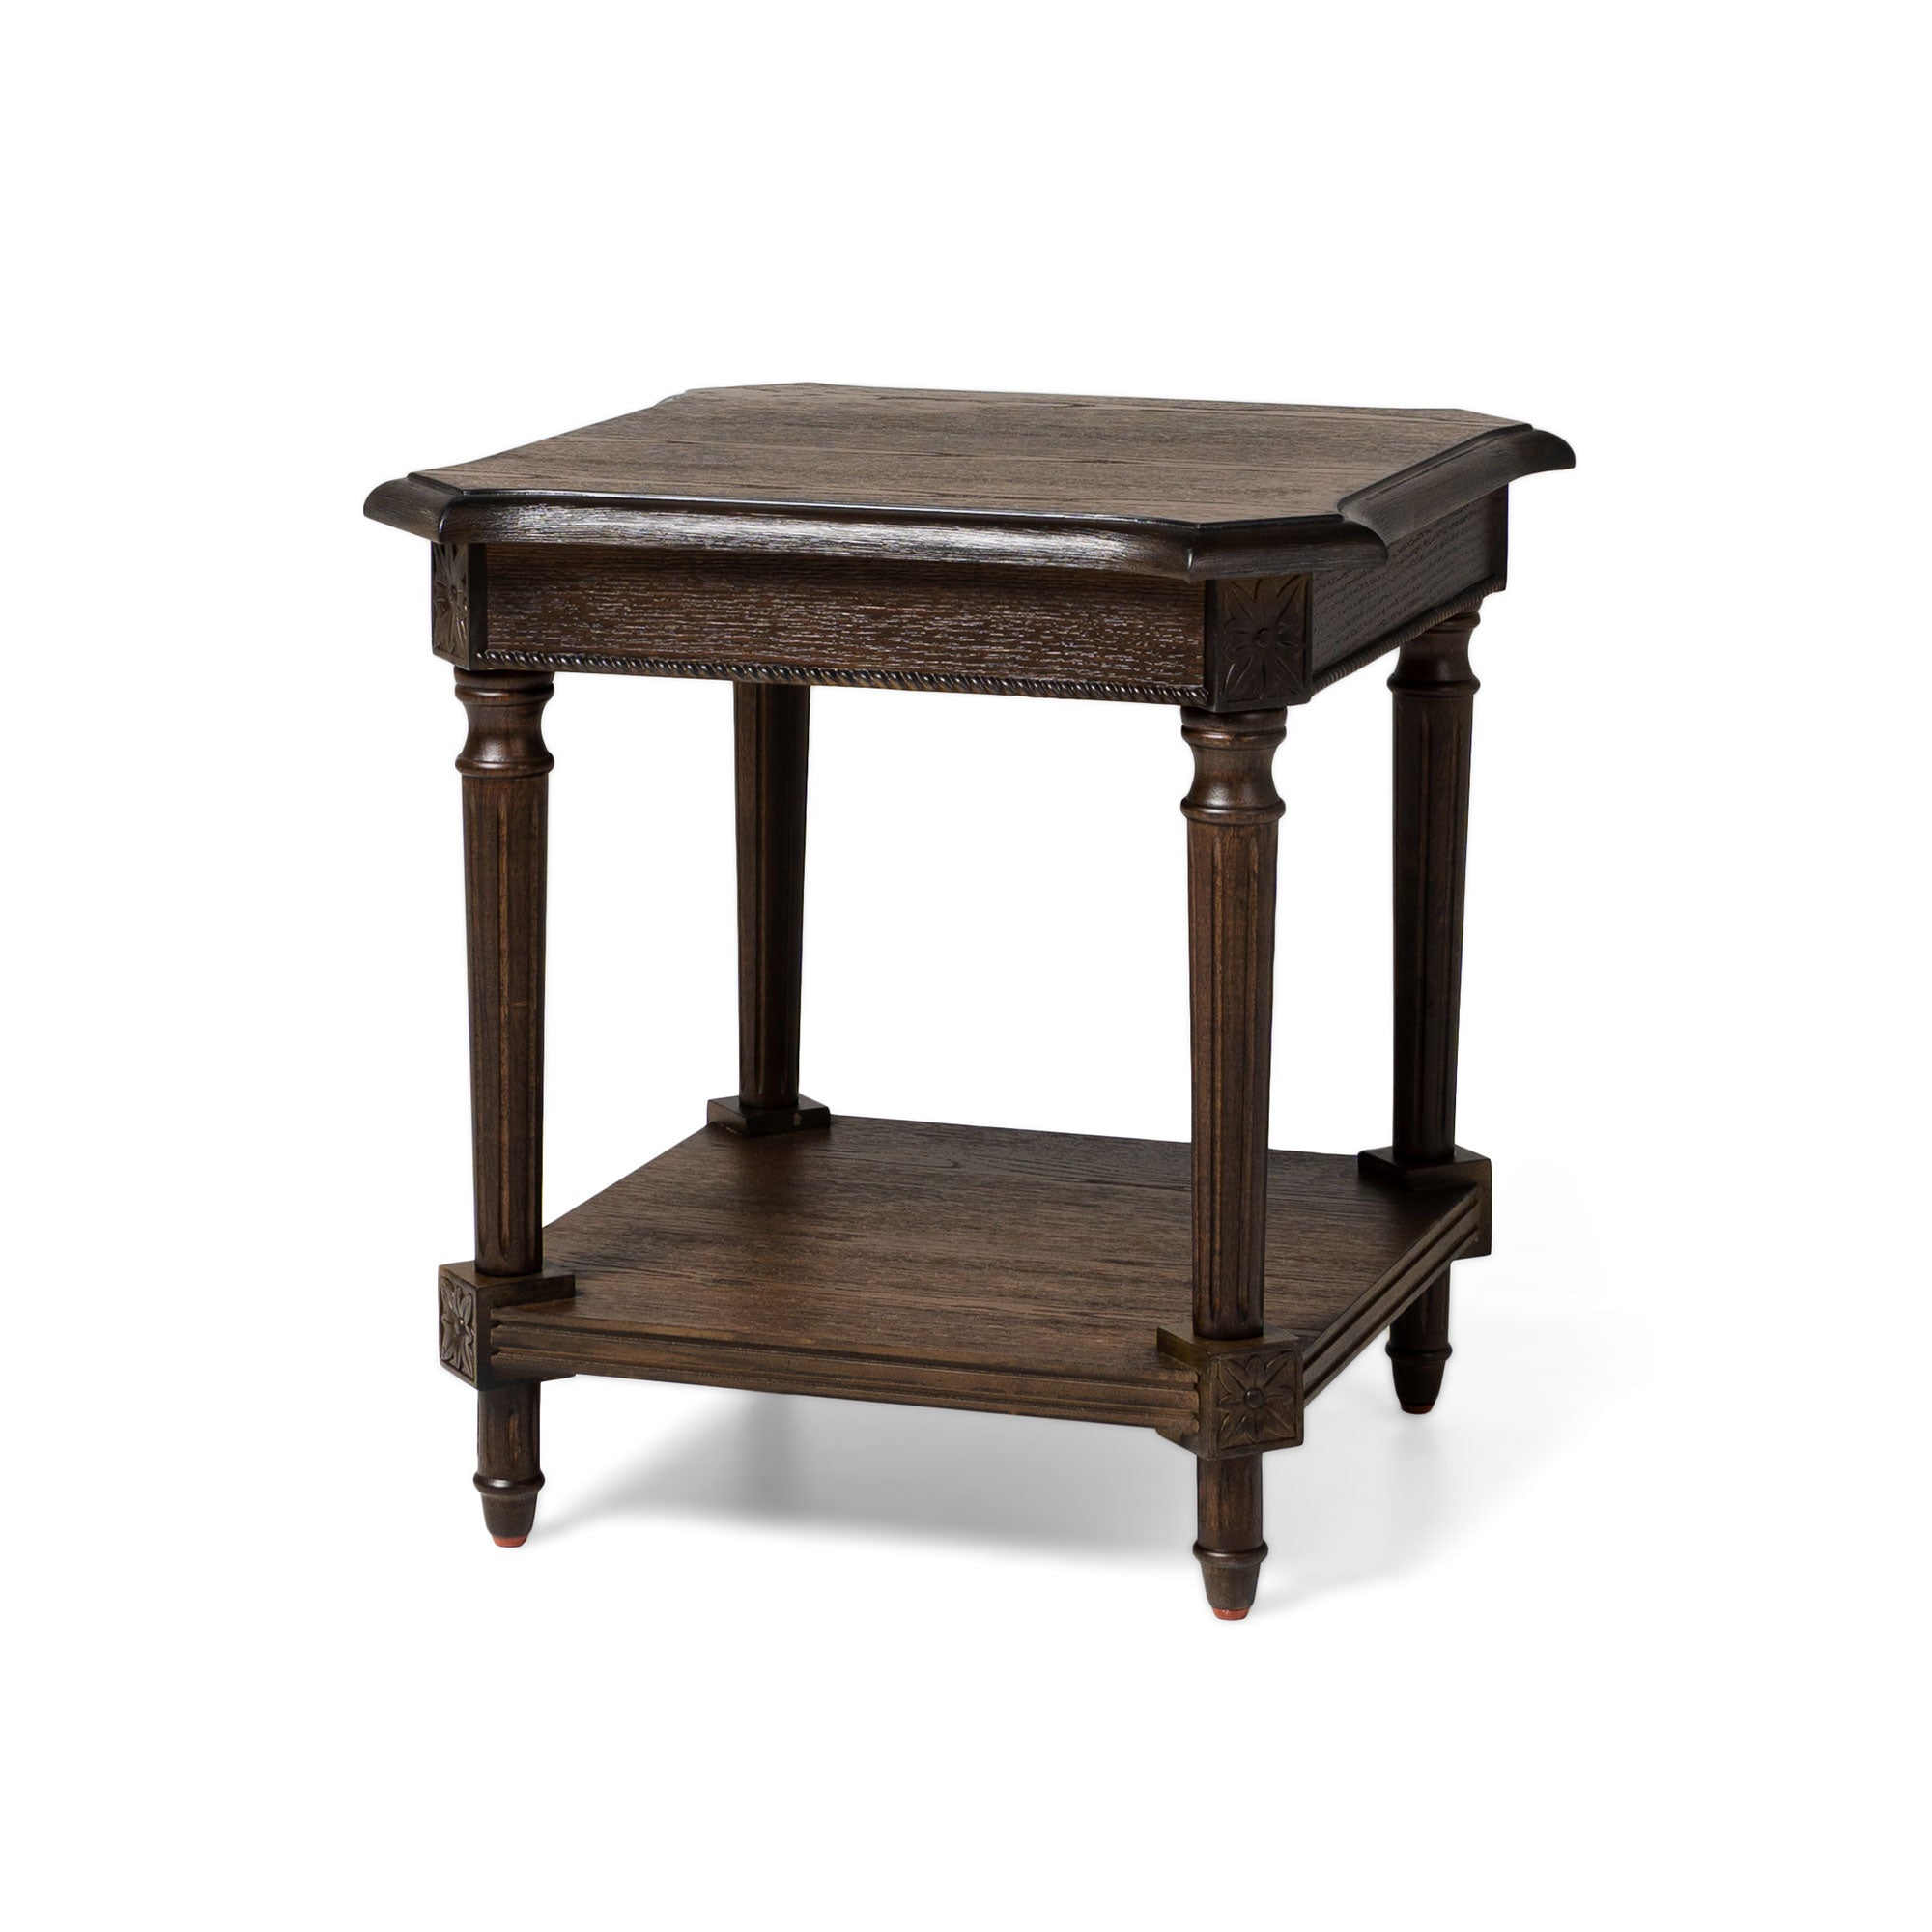 Pullman Traditional Square Wooden Side Table in Antiqued Brown Finish in Accent Tables by Maven Lane